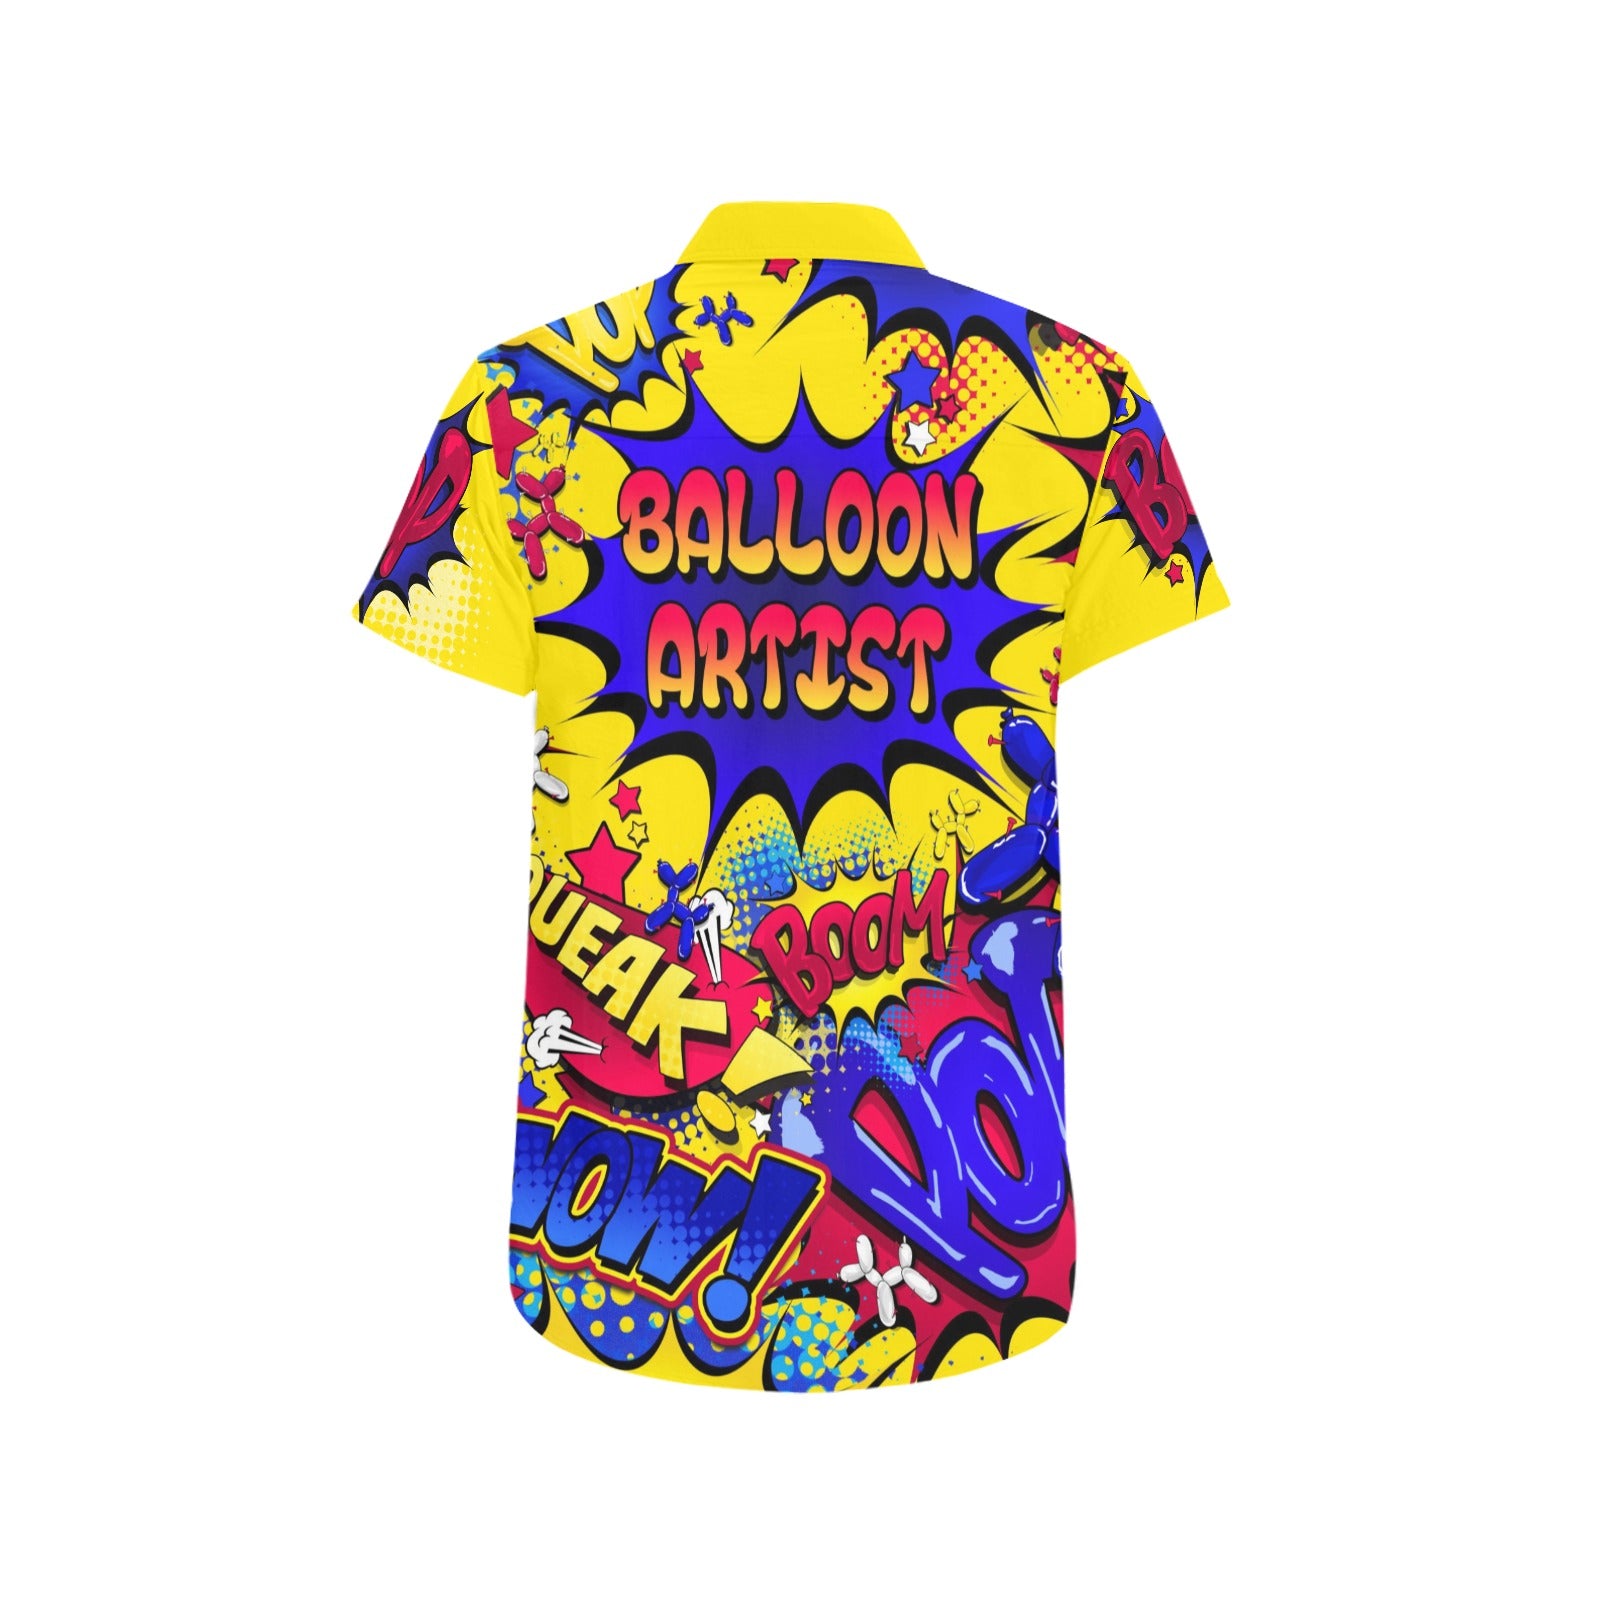 Balloon Twisting Shirt in red blue and yellow for professional Balloon Artists